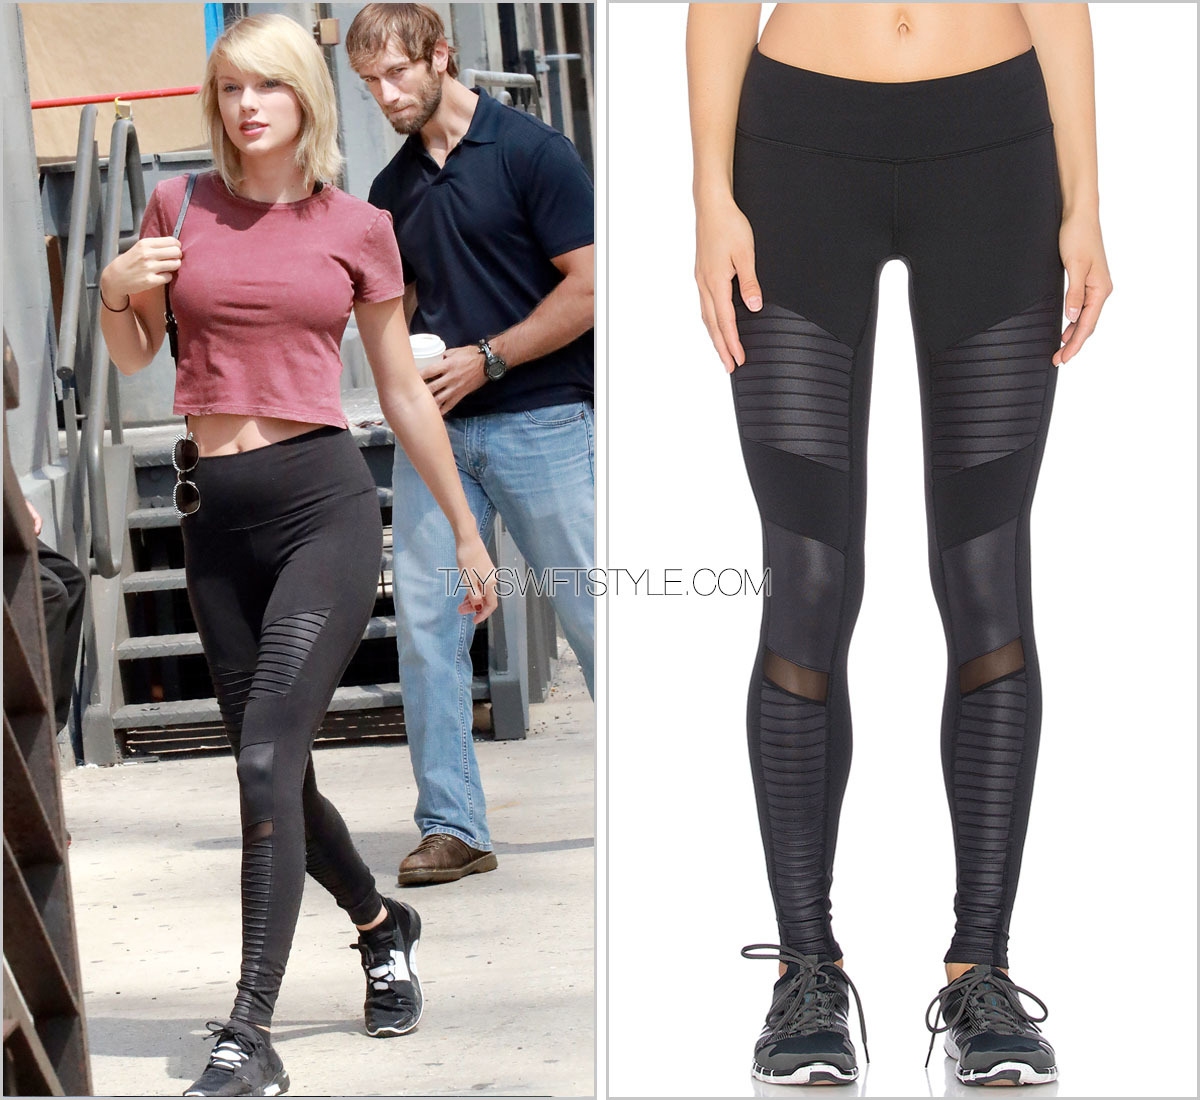 Ambassade Væve orientering Taylor Swift Style — Arriving at the gym | New York City, NY | August...